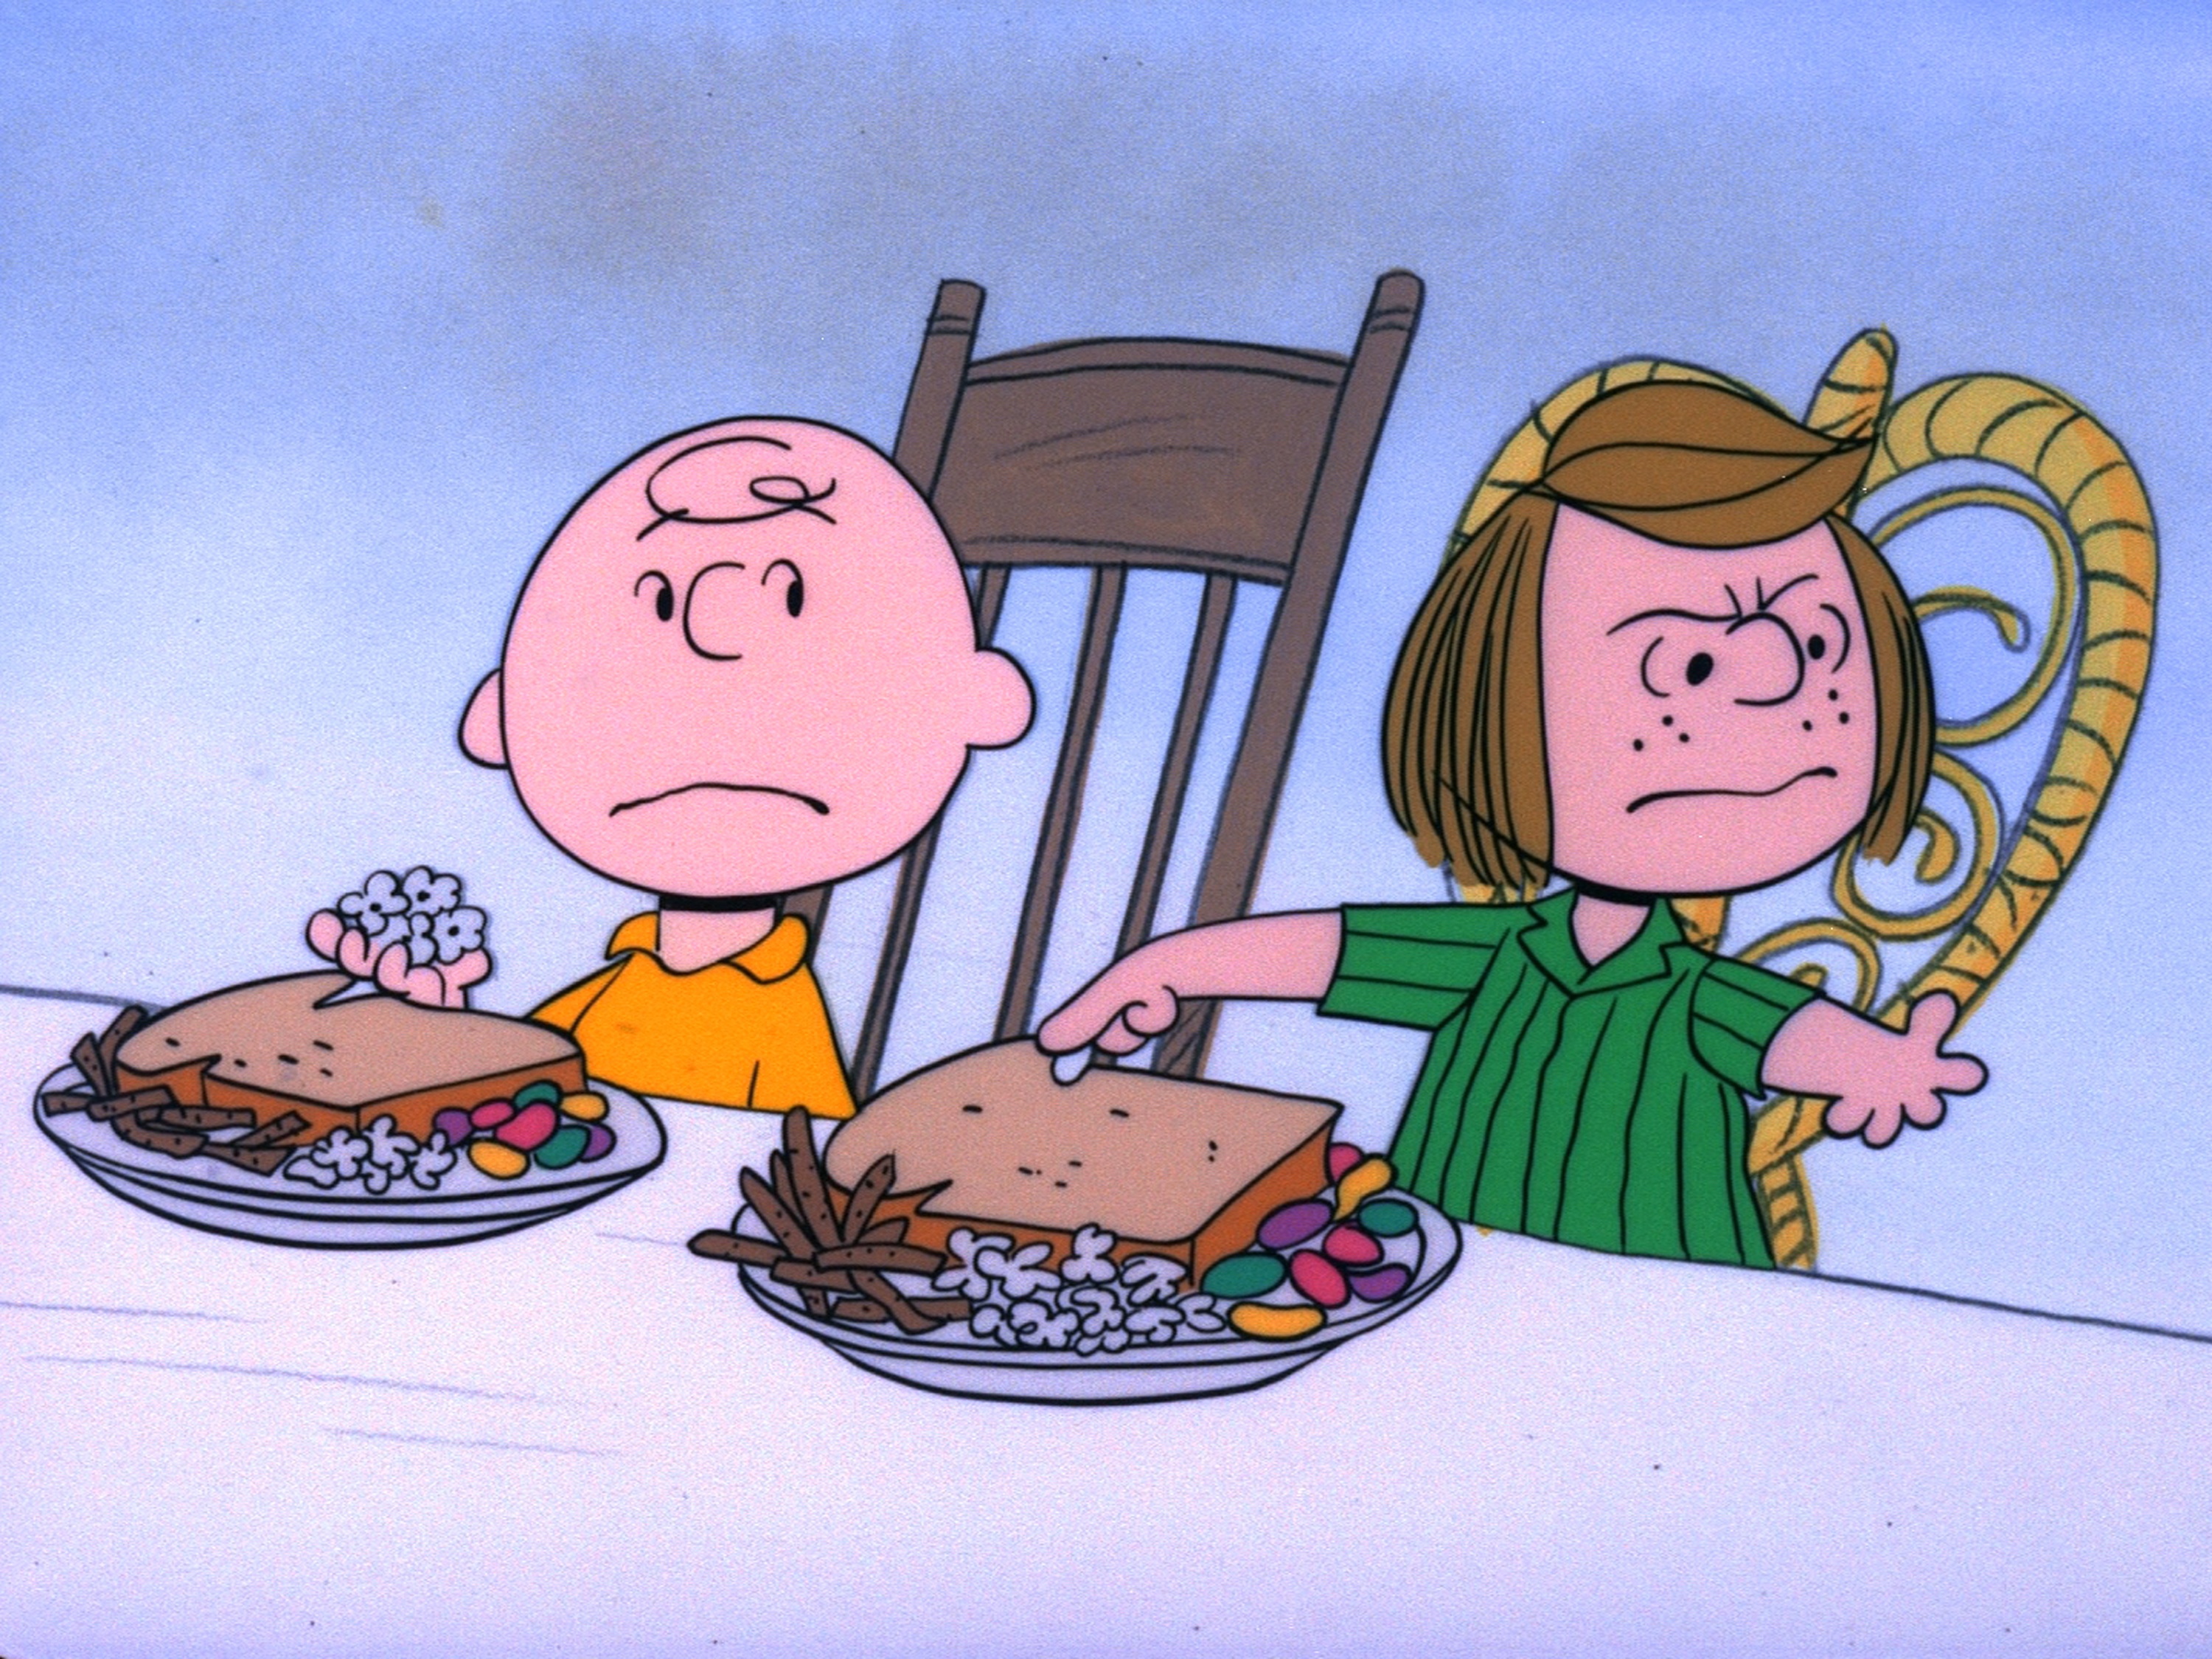 Peppermint Patty, sitting next to Charlie Brown, gestures angrily in 'A Charlie Brown Thanksgiving'